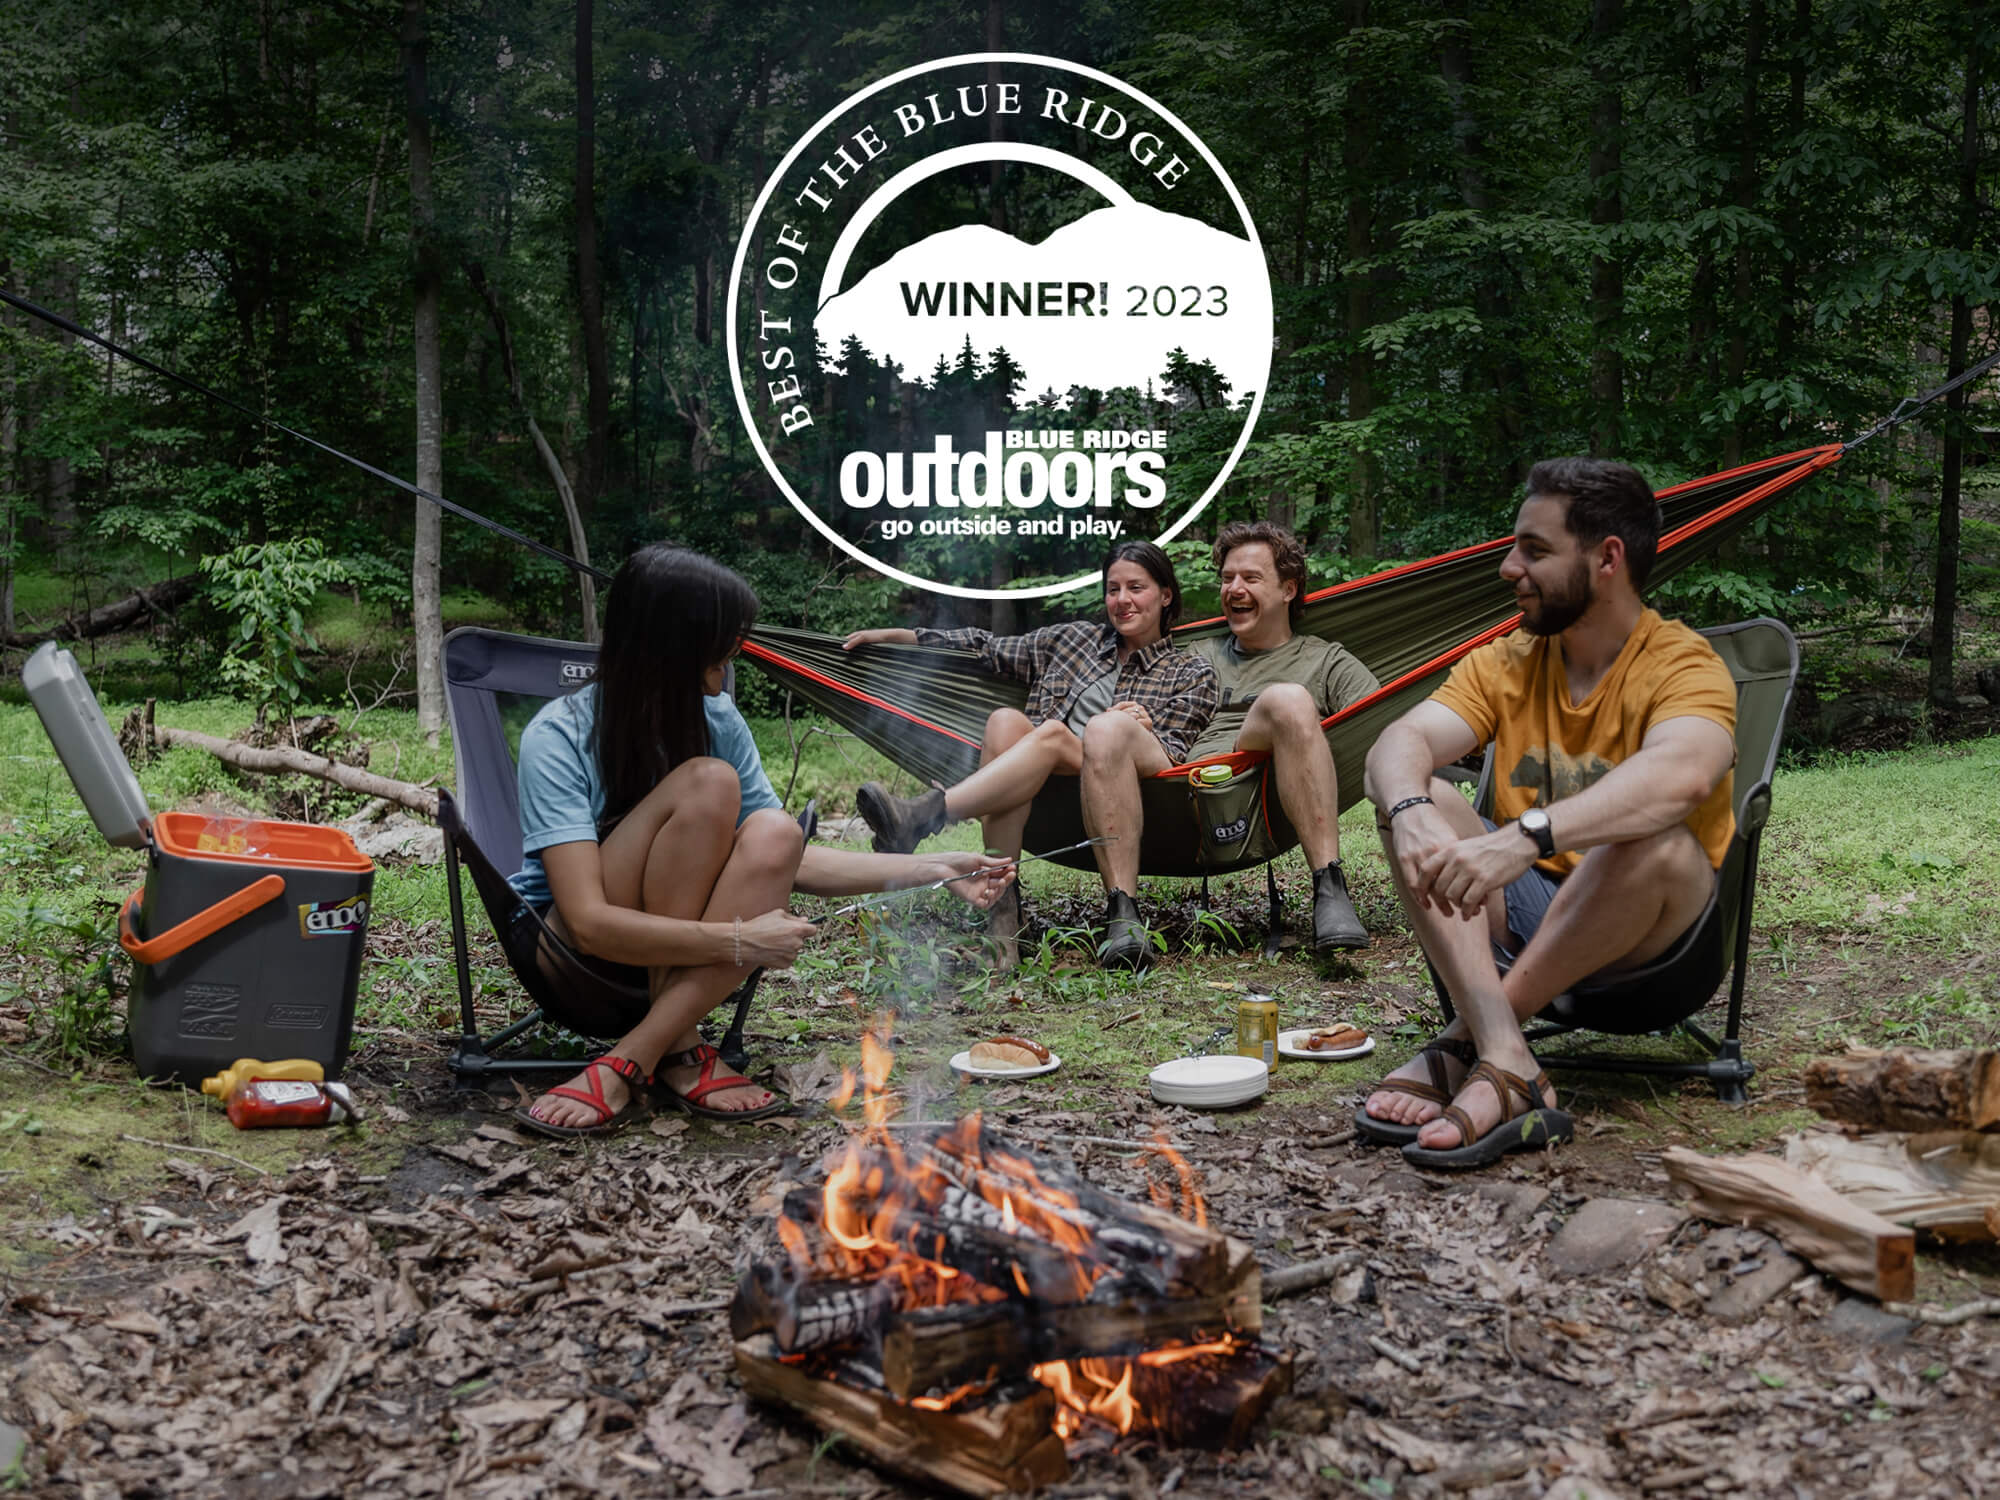 Friends relaxing outside in portable camp chairs and two person hammock near campfire. Best of the Blue Ridge Award logo is visible.